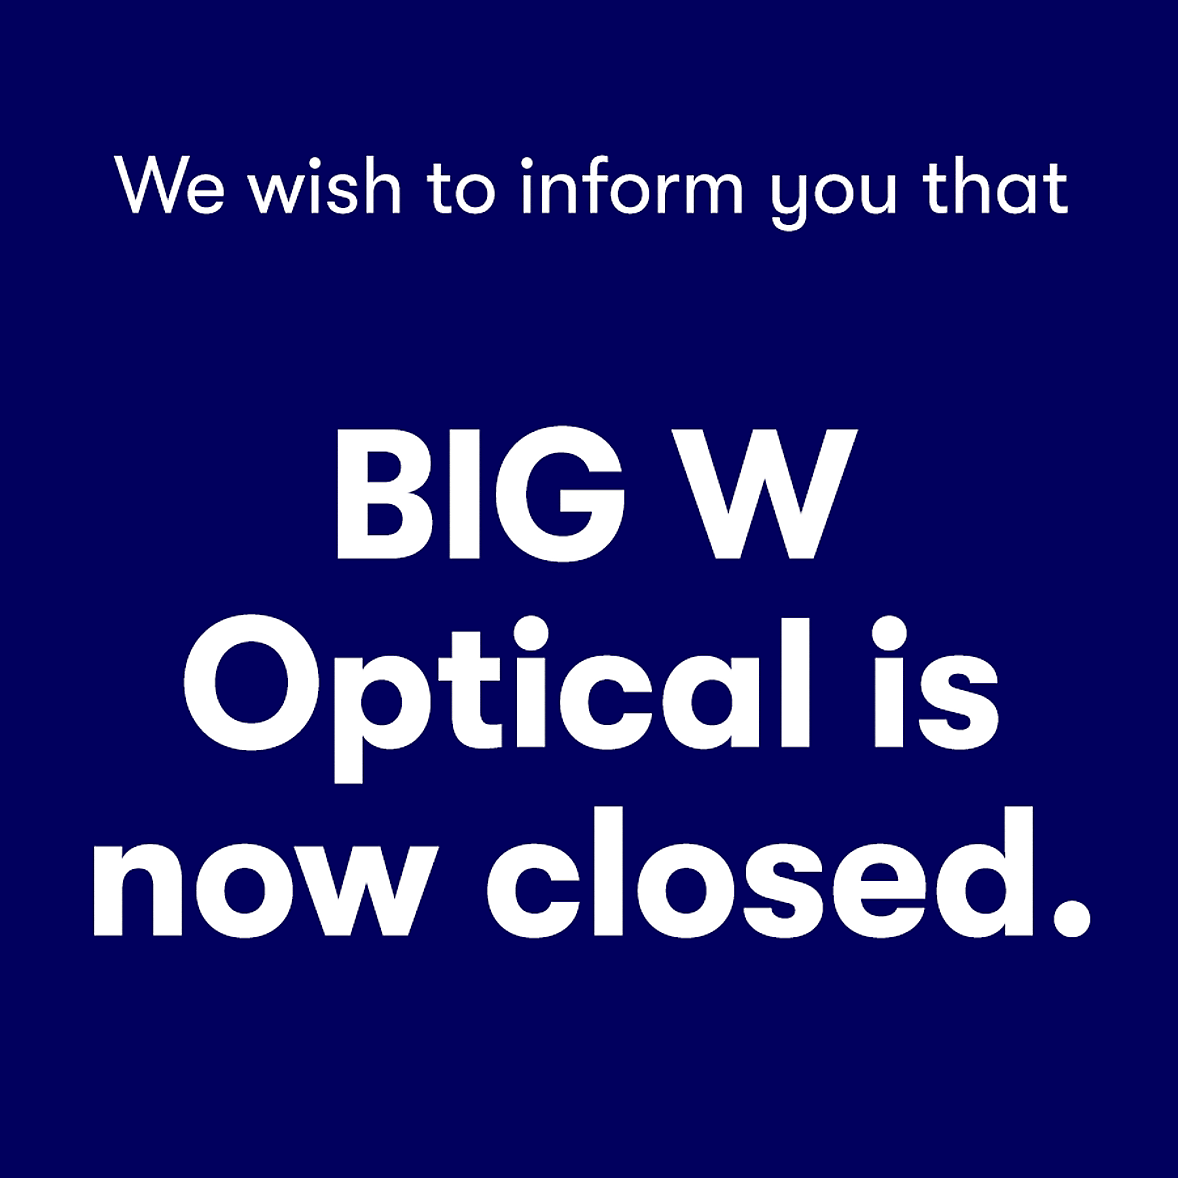 BIG W Optical is now closed